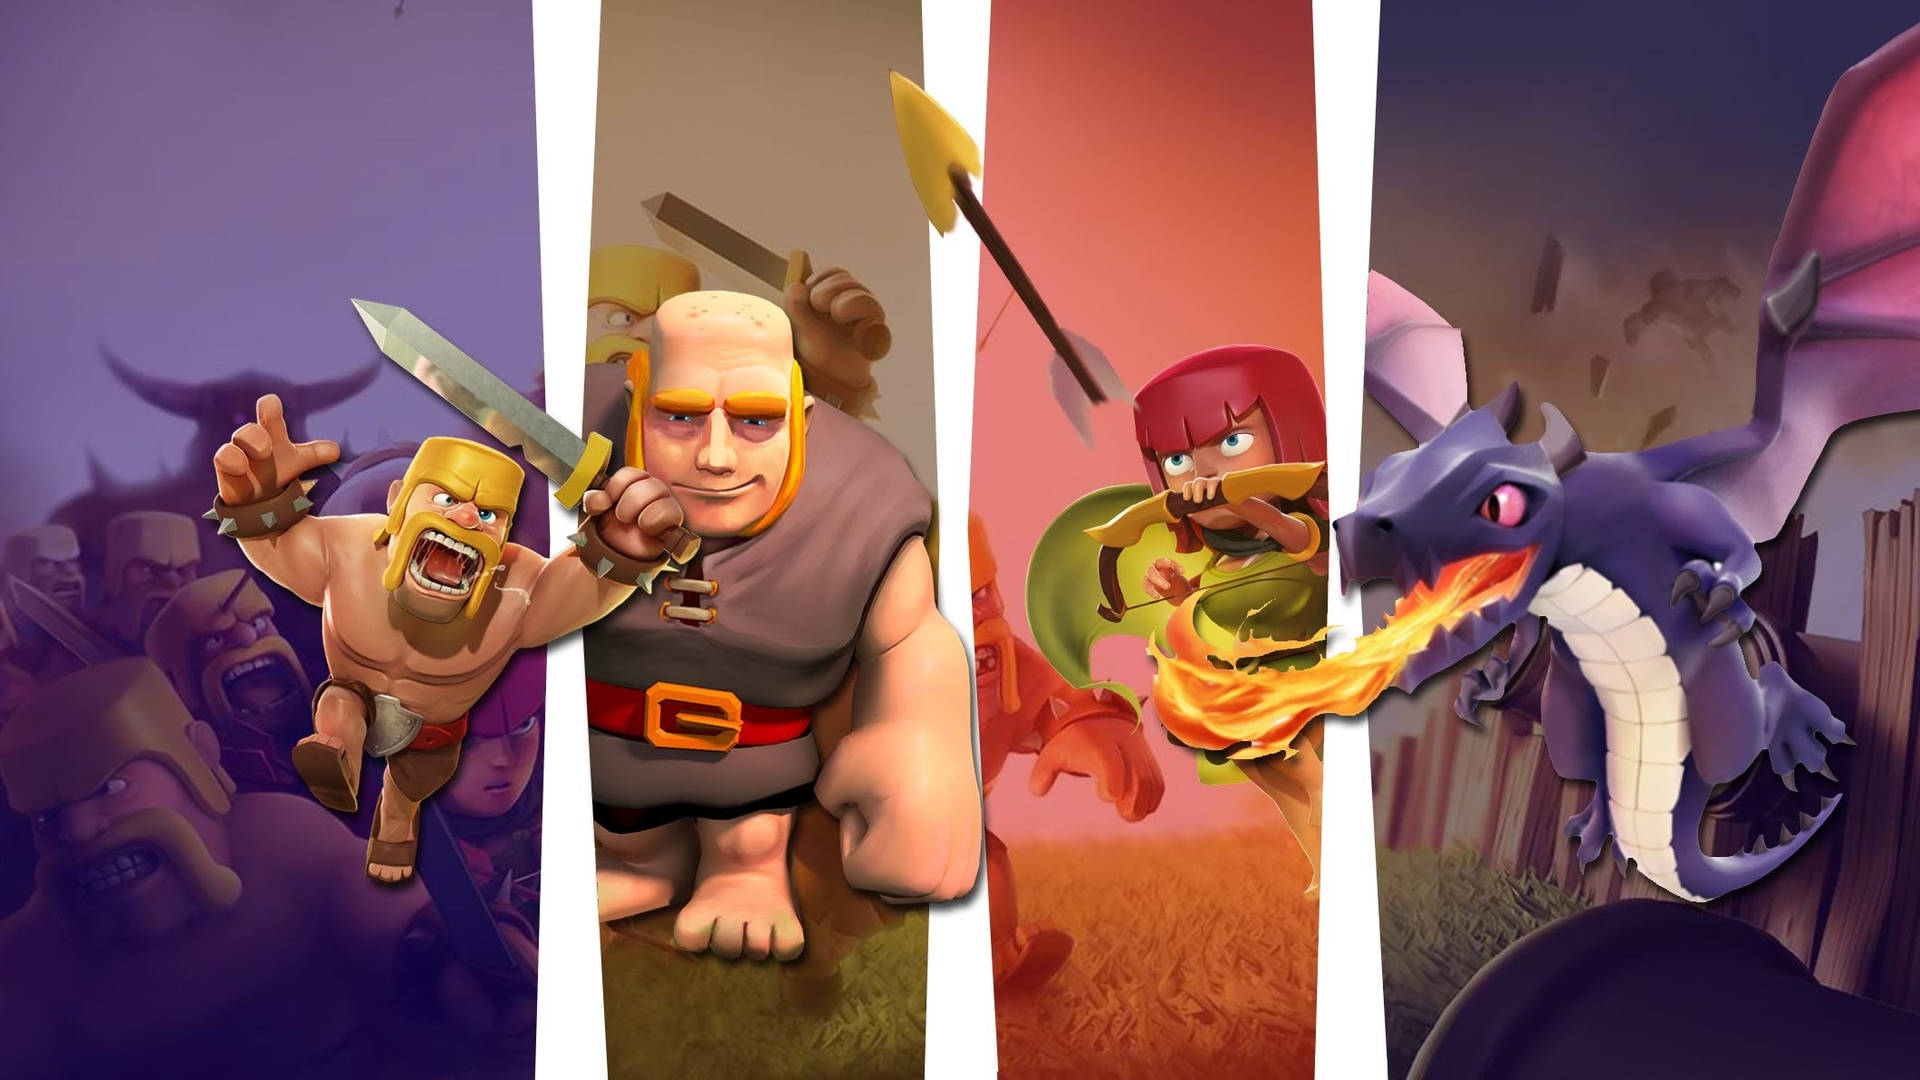 Download Clash Of Clans Four Characters Wallpaper 